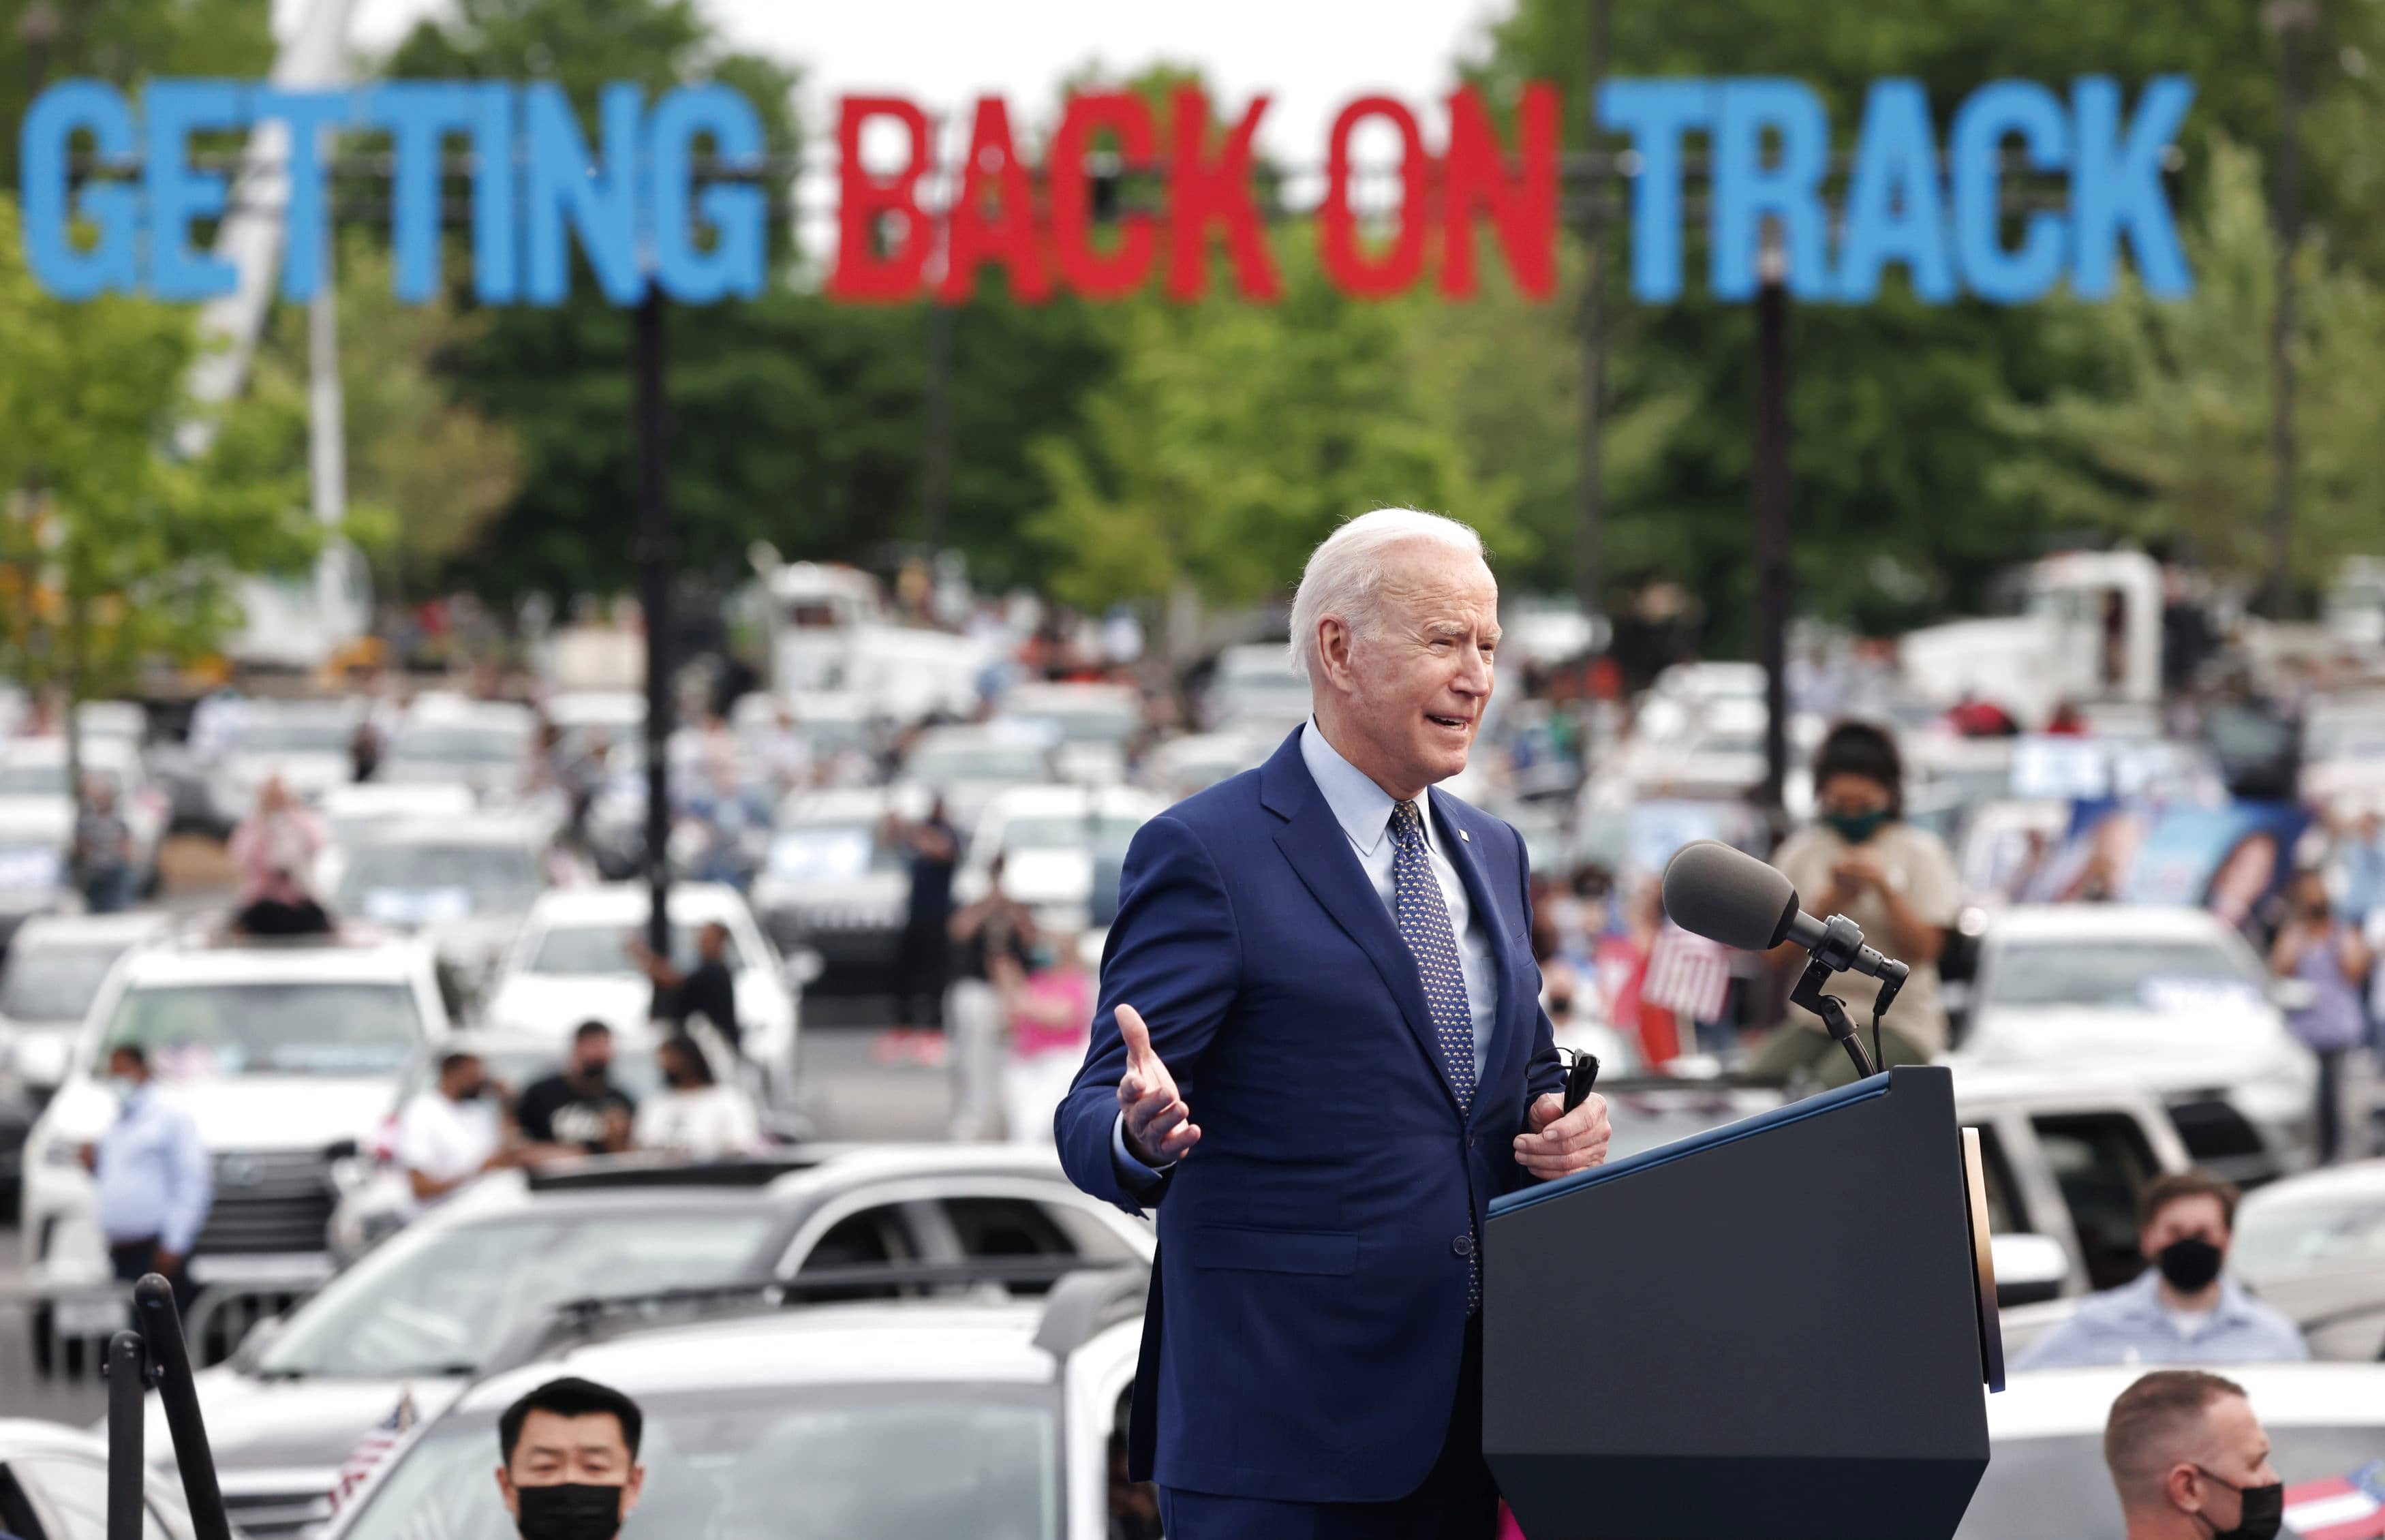 What Biden's latest moves could signal for Social Security reform efforts 